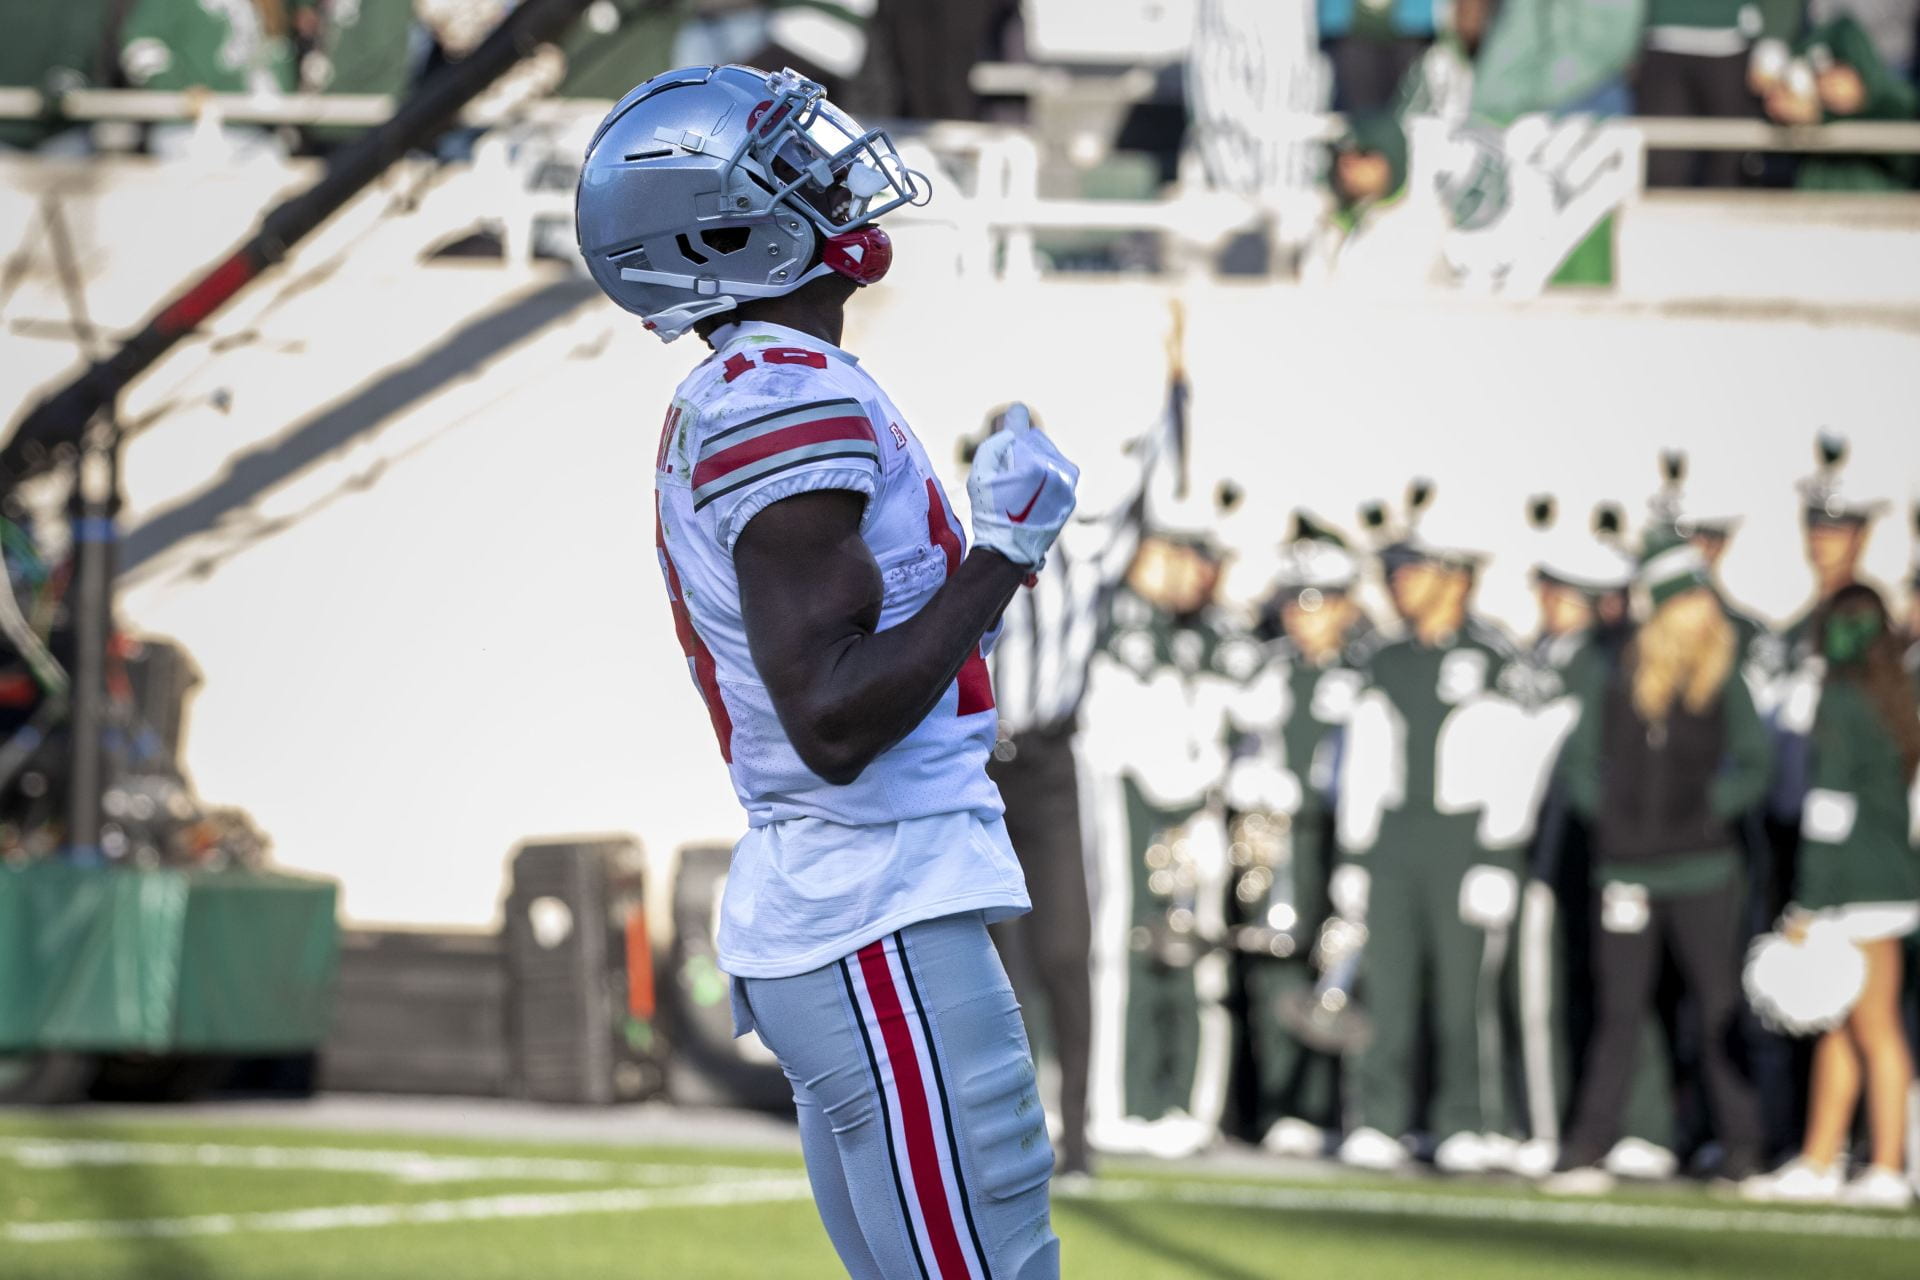 Football: 'Hopefully more touchdowns come': Harrison catches 3 TDs, rewrites Buckeyes' record books in 49-20 win at Michigan State